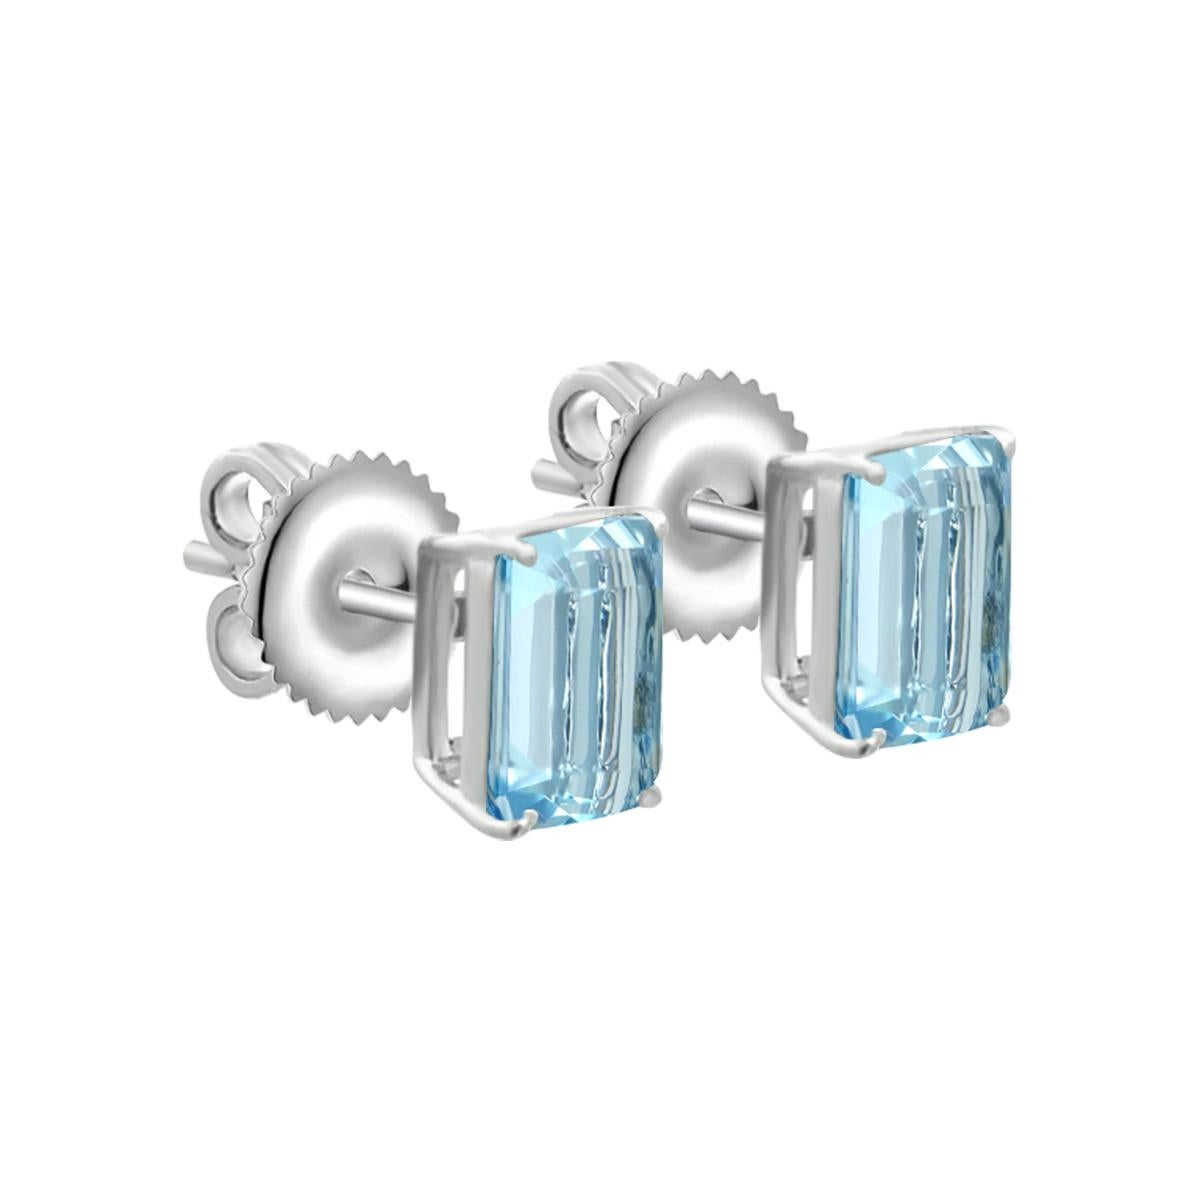 A Bold And classic Retro Vintage Aquamarine Stud Earring Demands To Be Noticed.
This Is A Brand New Vintage Reproduction Solid Aquamarine Earring And This Classy Earing Holds A Beautiful 8x6mm Blue Aquamarine Gemstone Settled In 14K White Gold. The